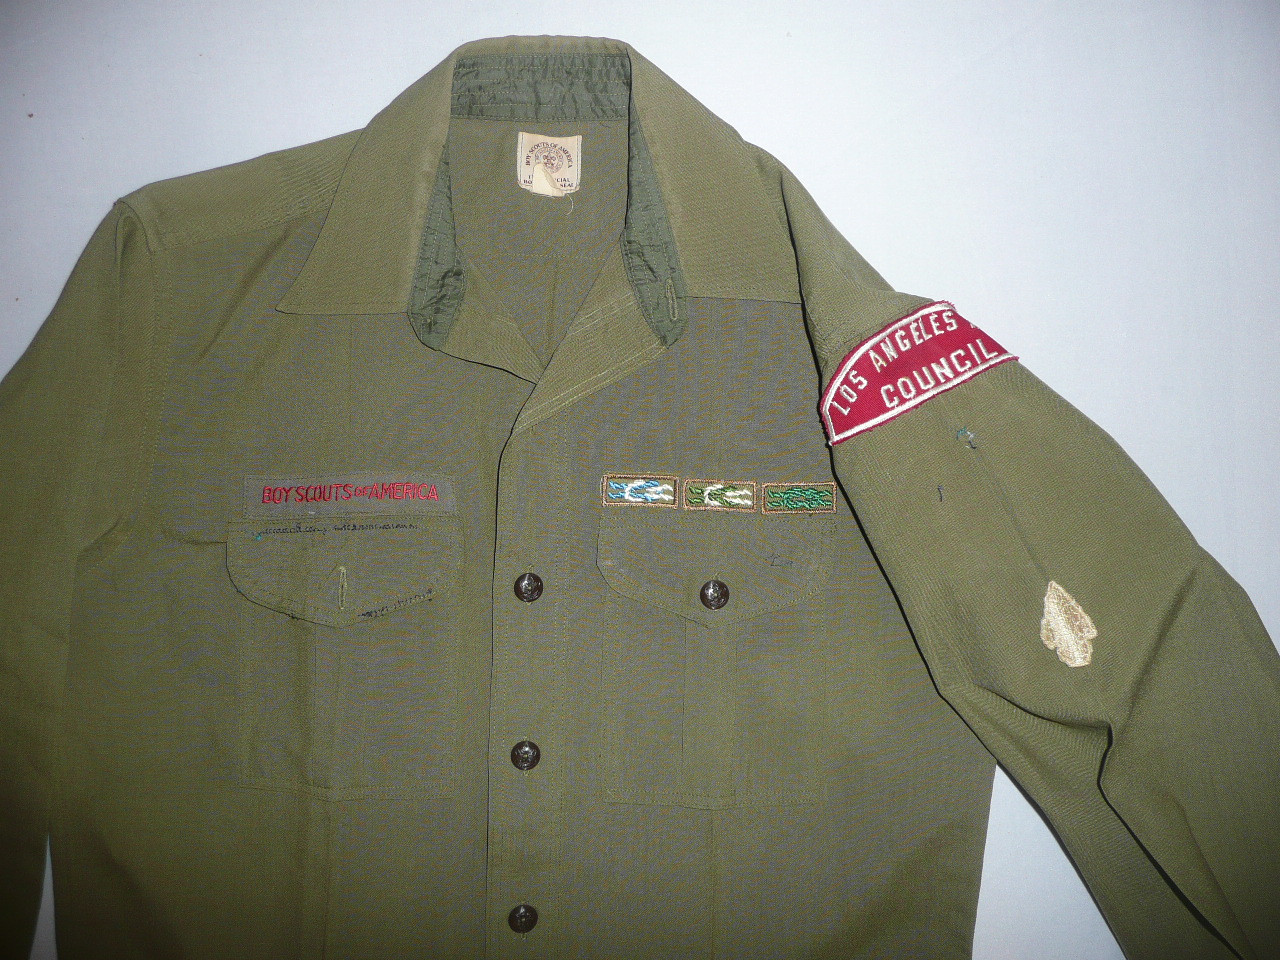 1960's Boy Scout Leader Lite Wool Uniform Shirt with LOS ANGELES AREA COUNCIL R/W Strip and insignia, 20.5" Chest and 31" Length, #FB113